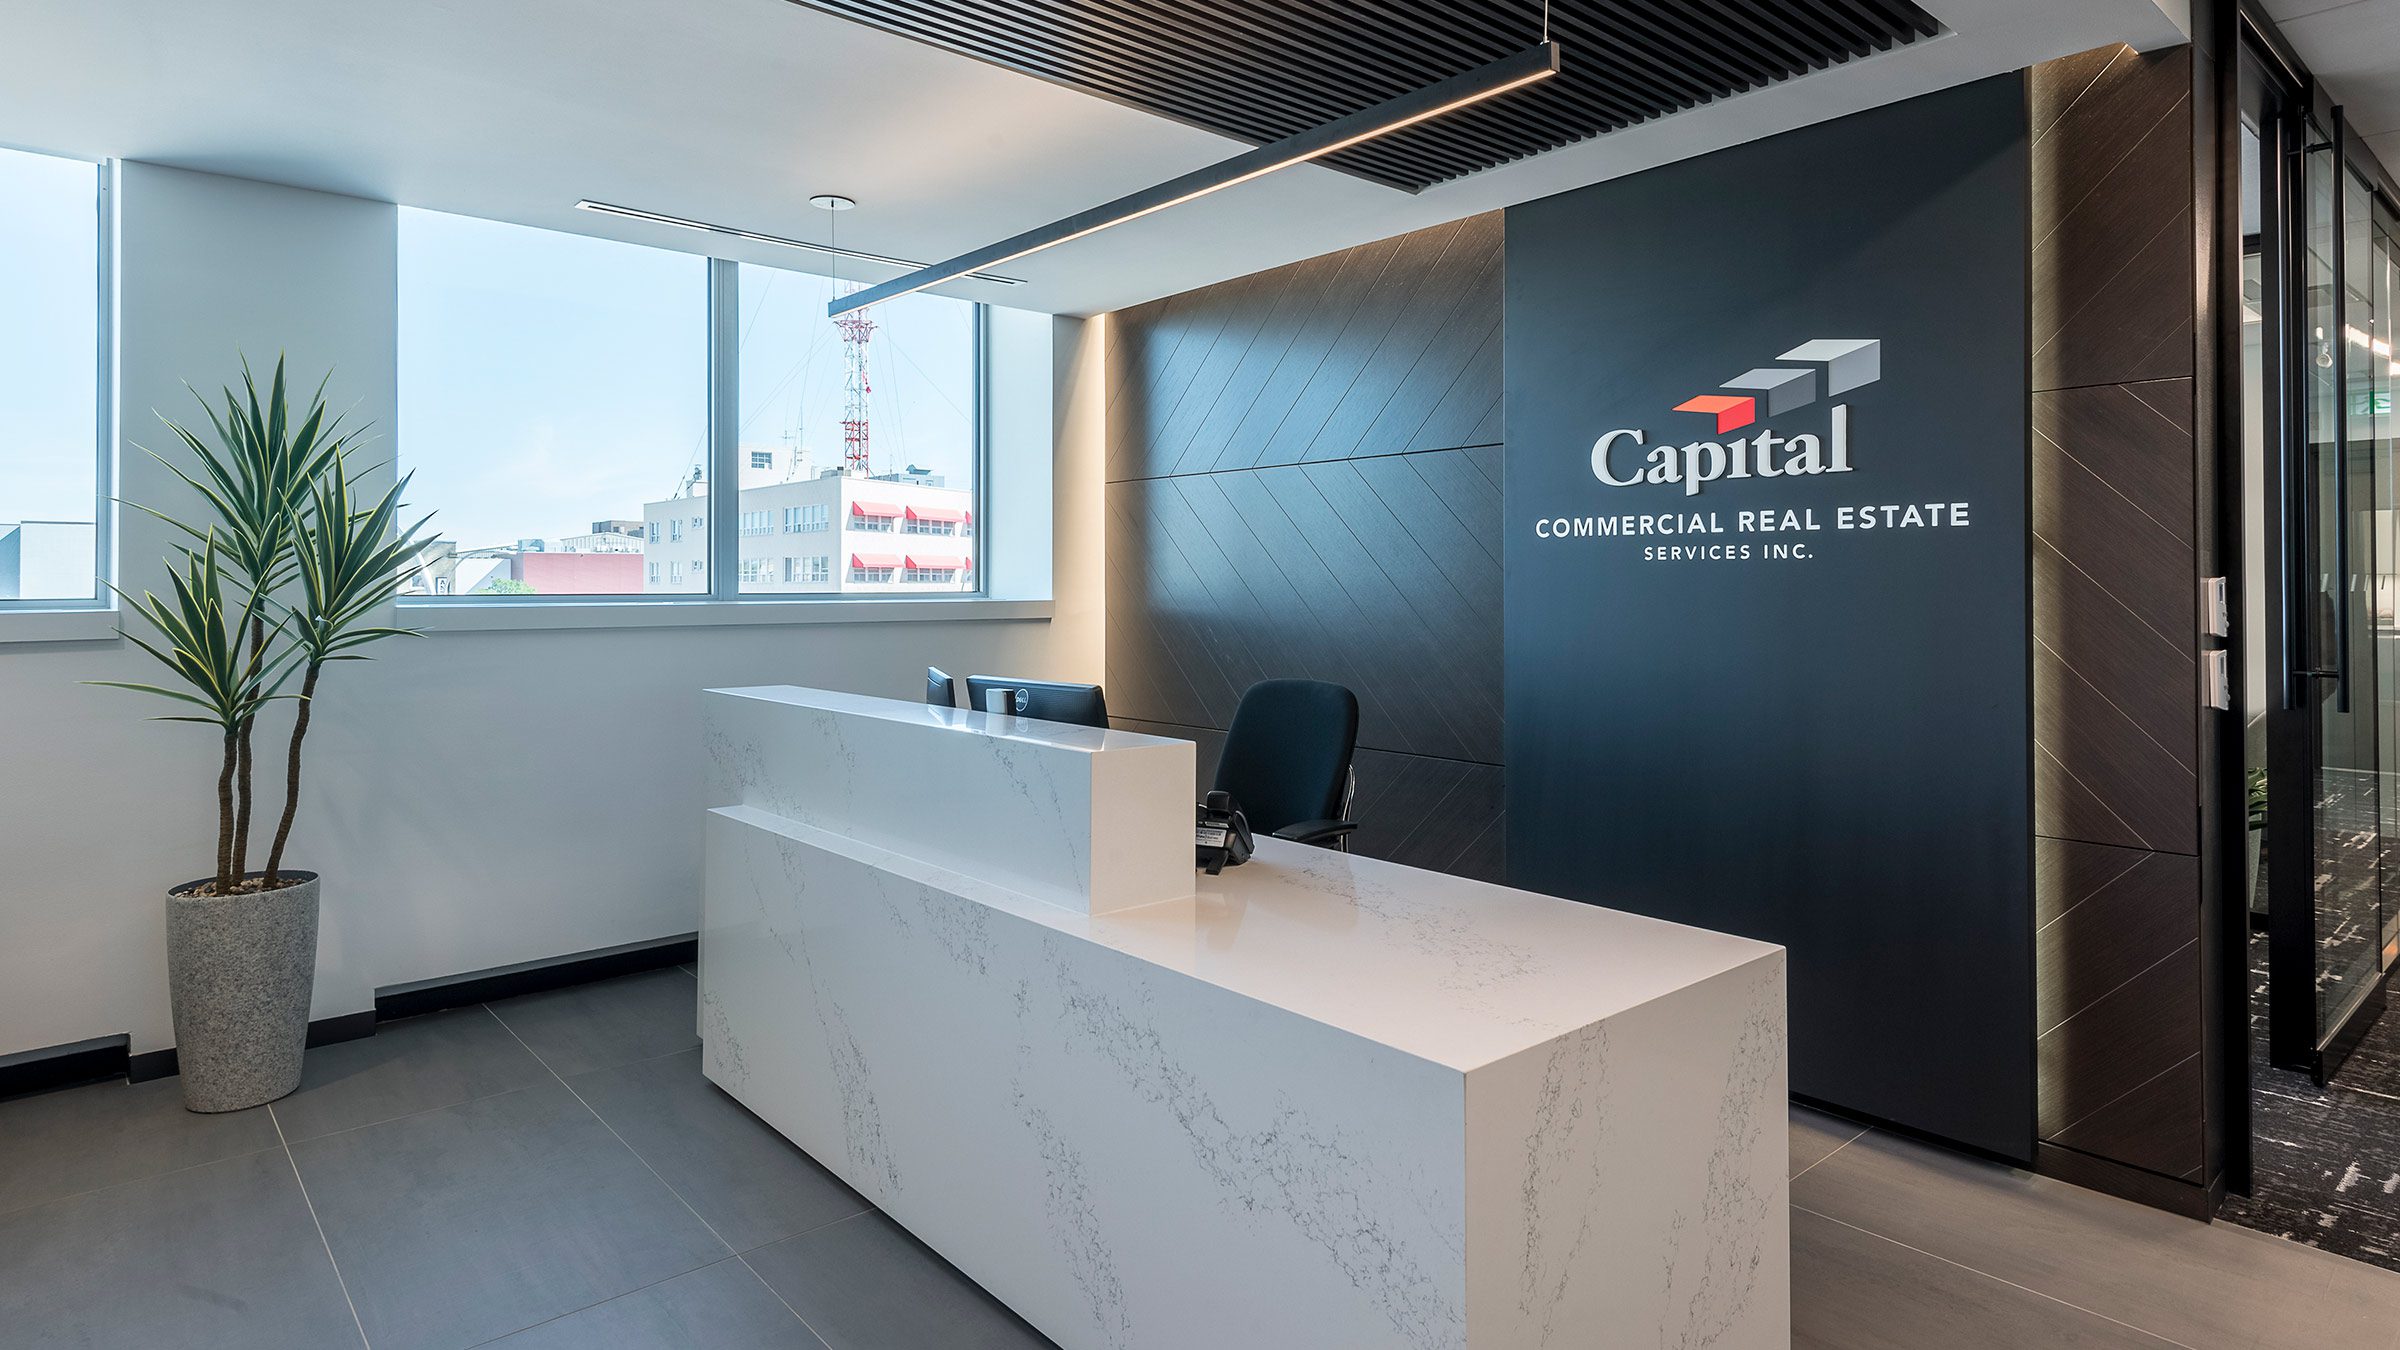 Capital Commercial Real Estate Office Reception Desk